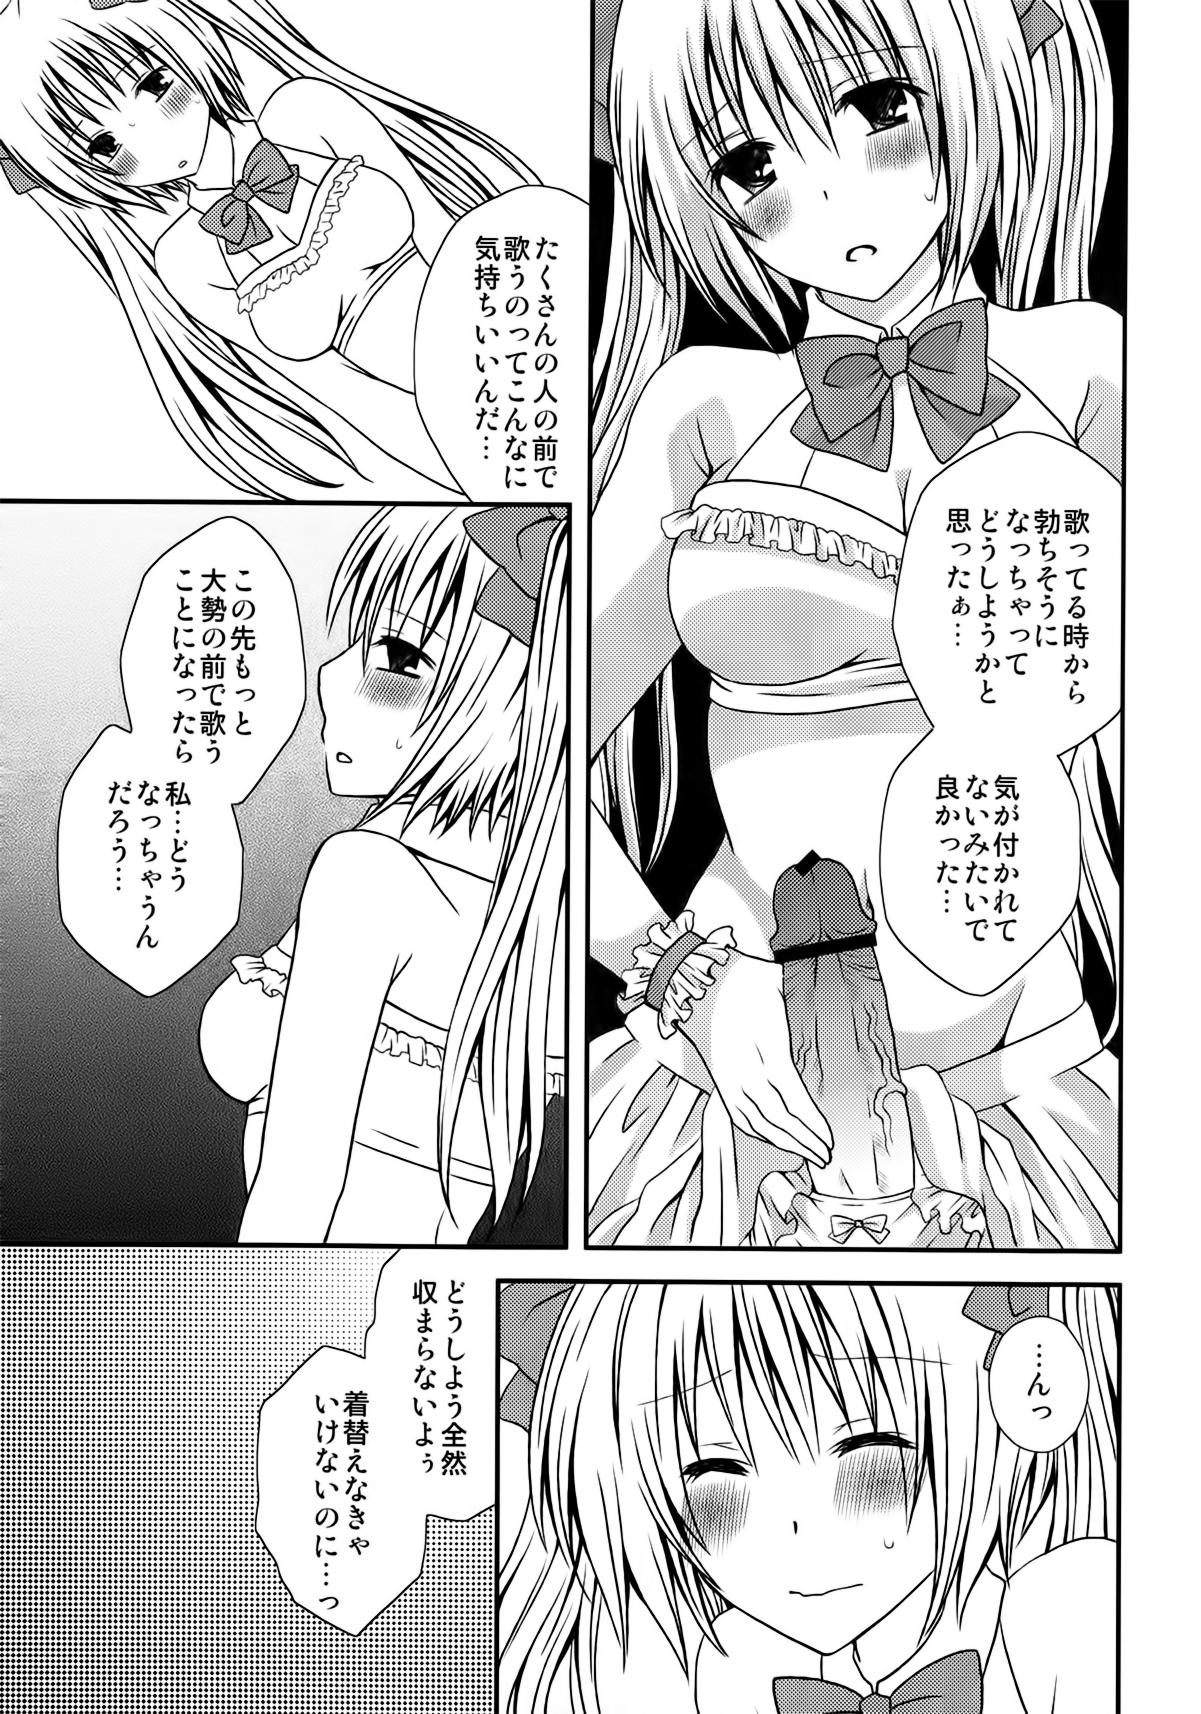 Perfect Body FutaDOL. - Idol debut All Natural - Page 7